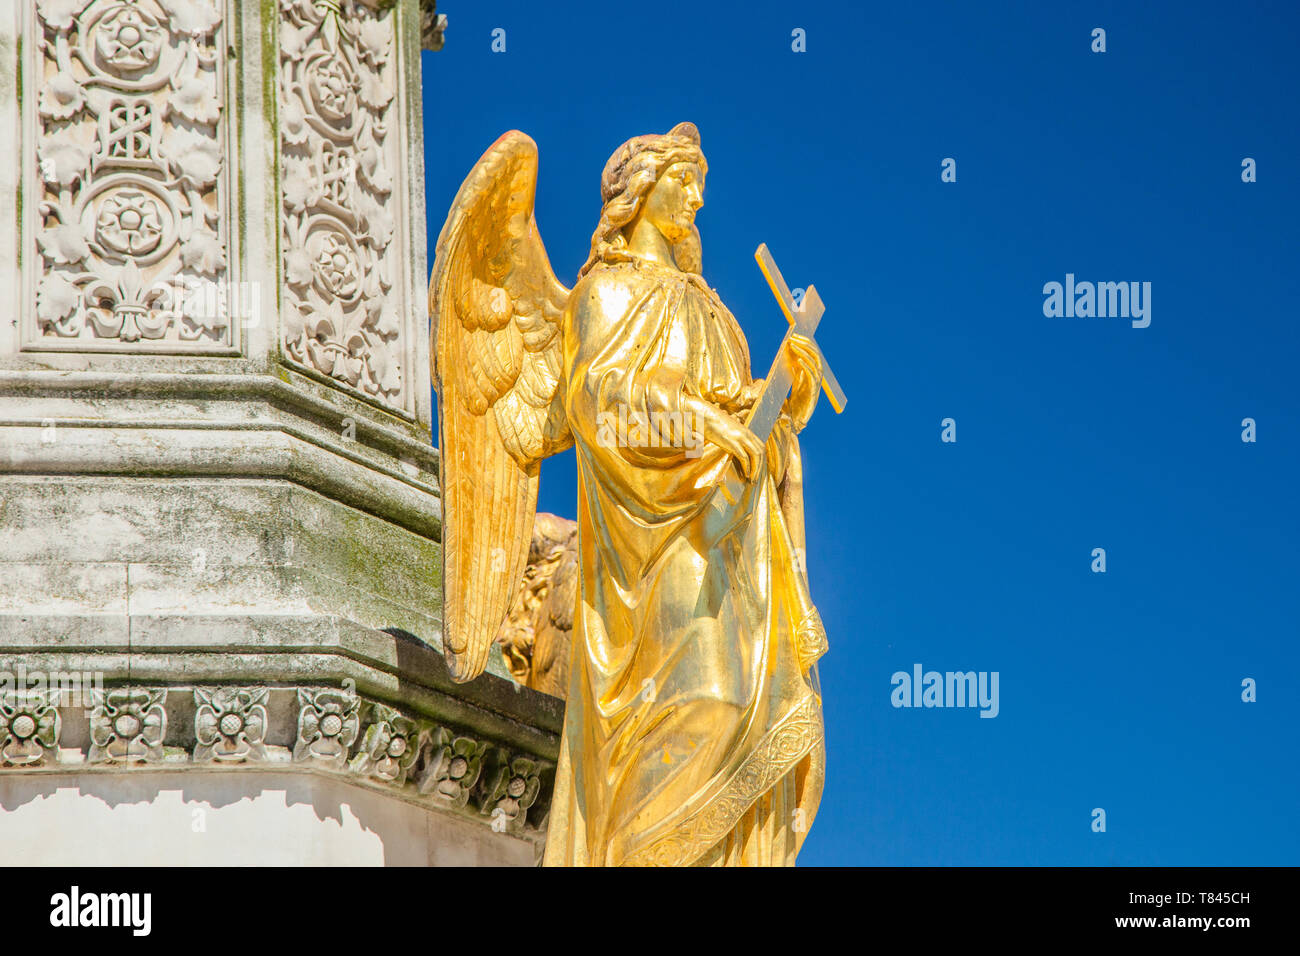 Mary column with golden angels statues in front of cathedral in Zagreb, Croatia, blue sky Stock Photo